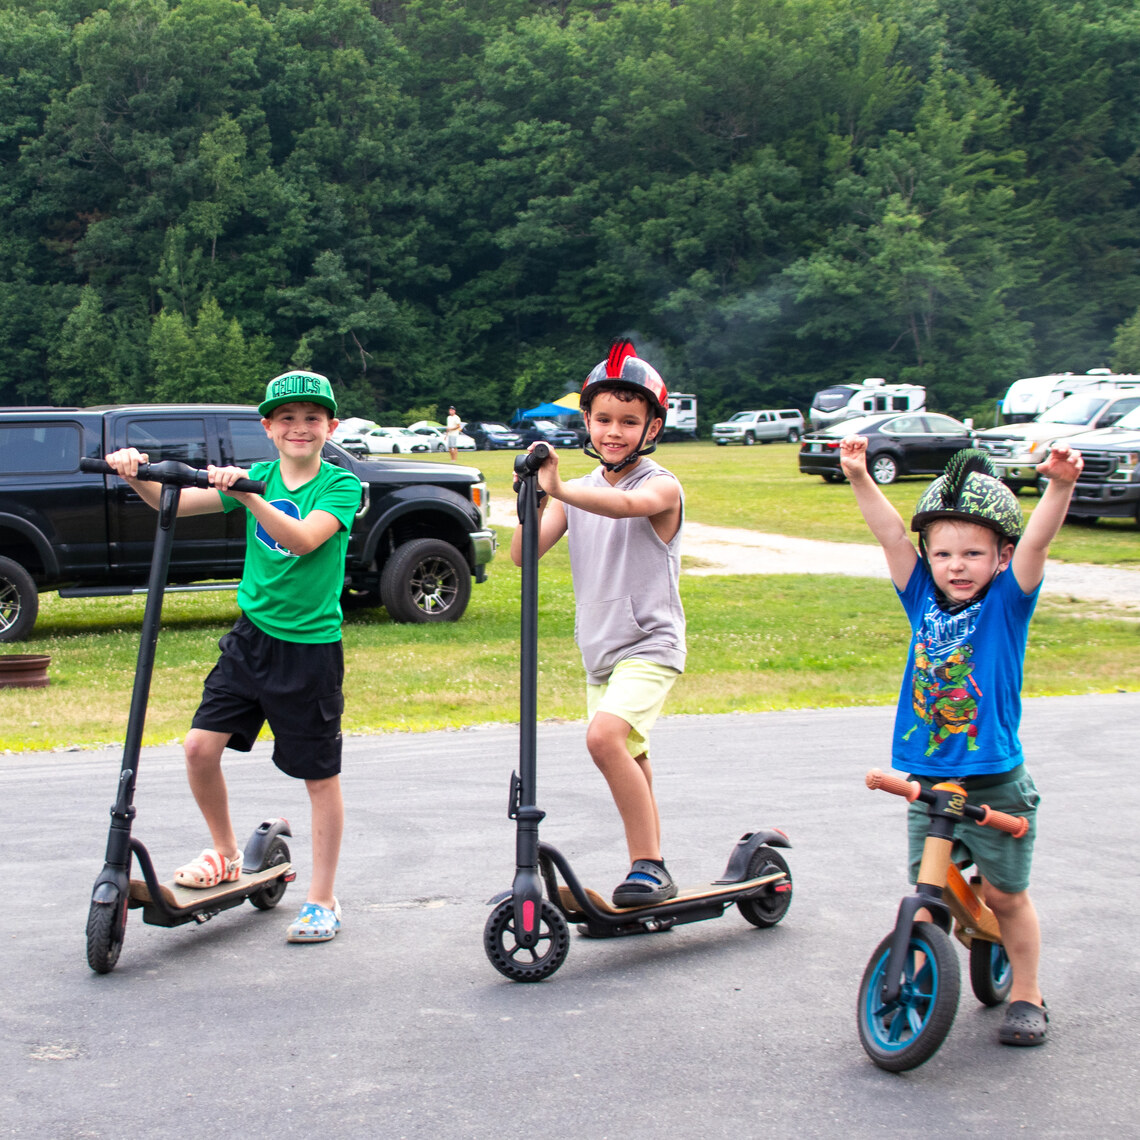 Boys on scooters at Gunstock Campground